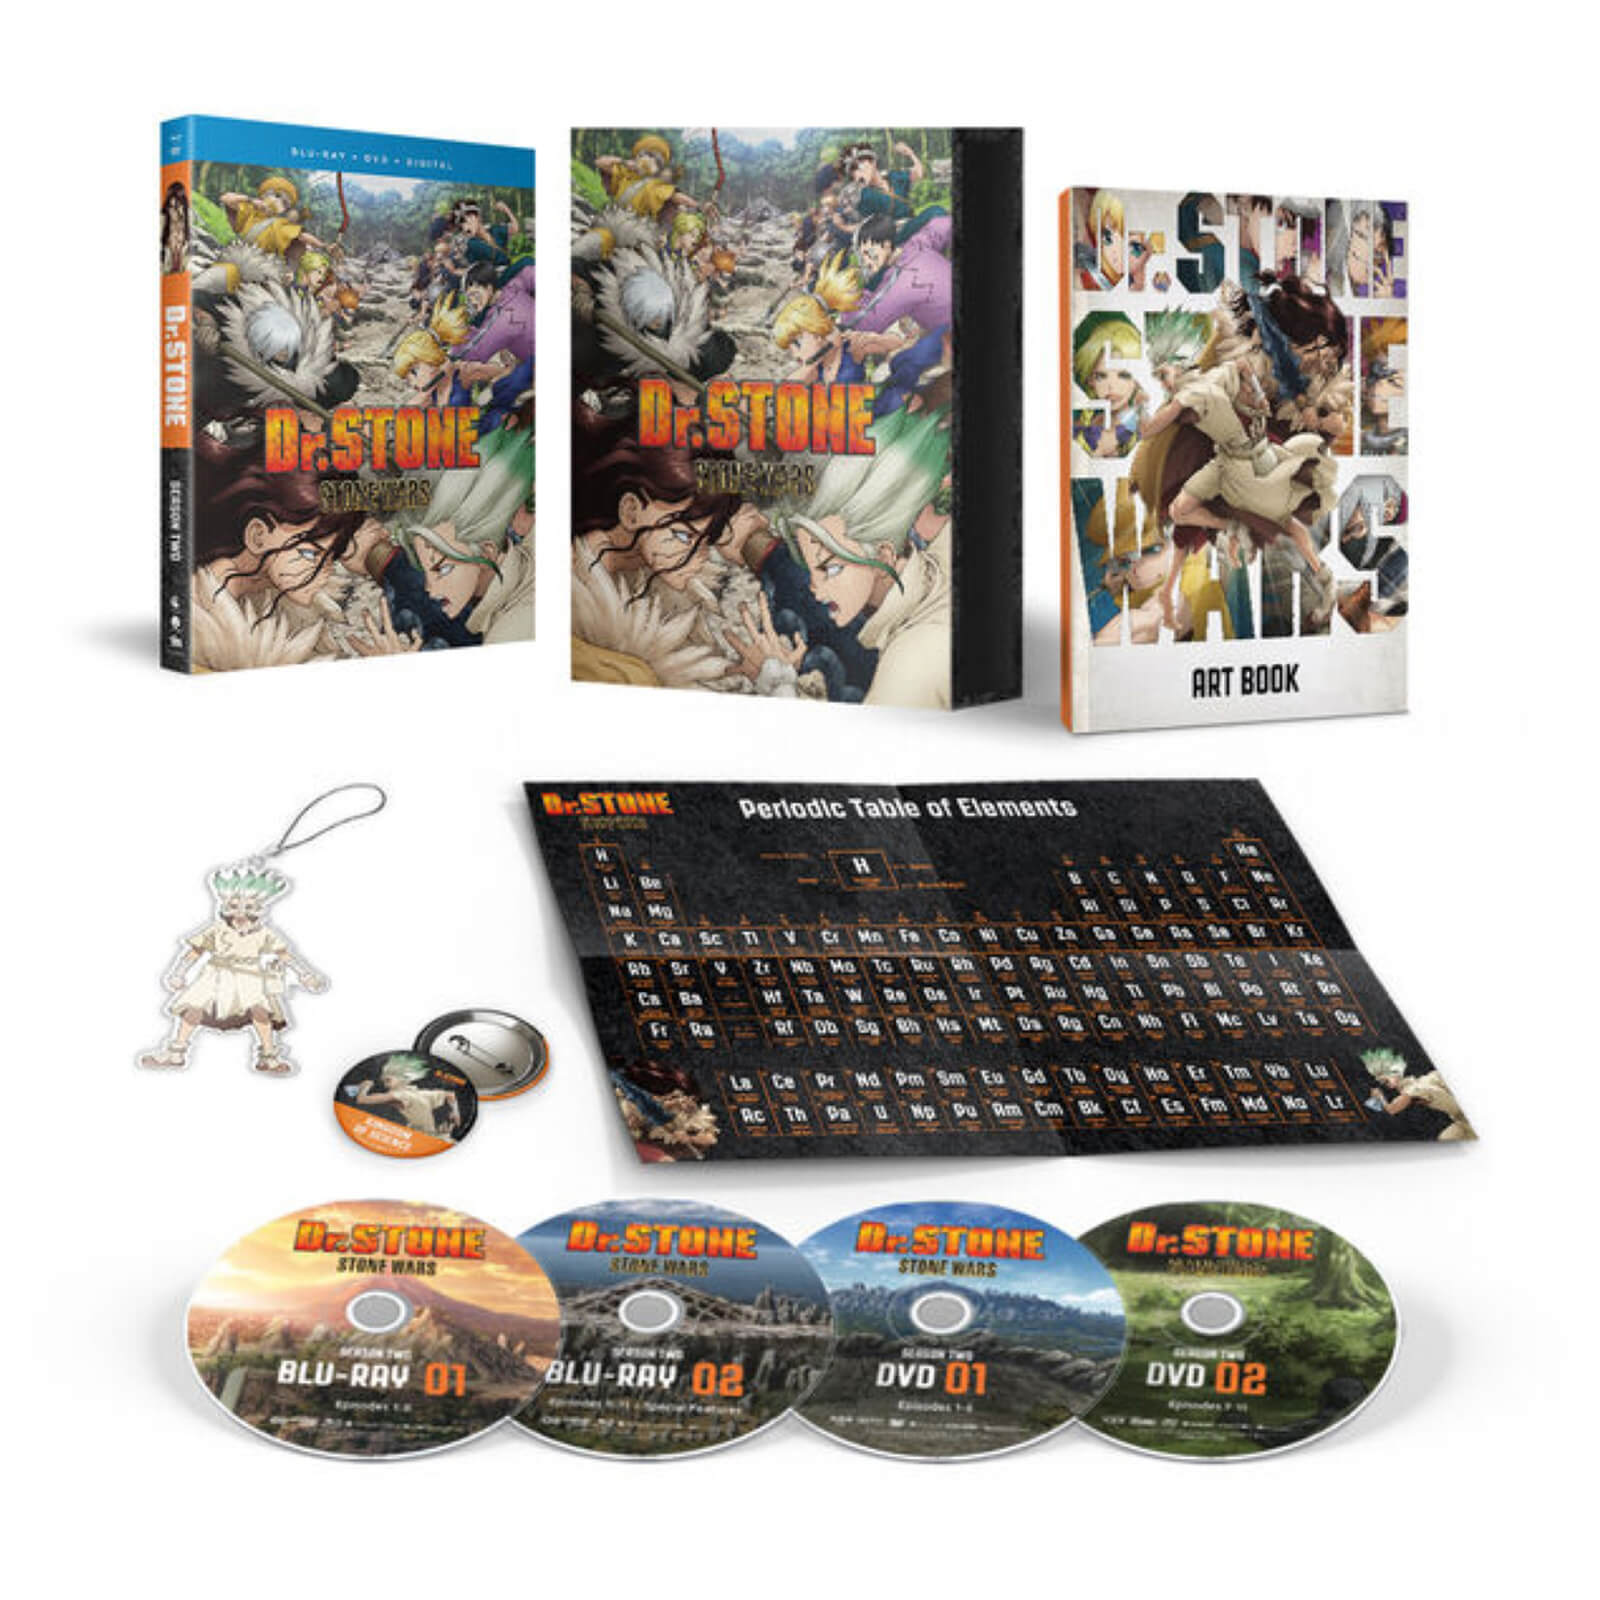 Dr. STONE: Season Two - Limited Edition (Includes DVD)